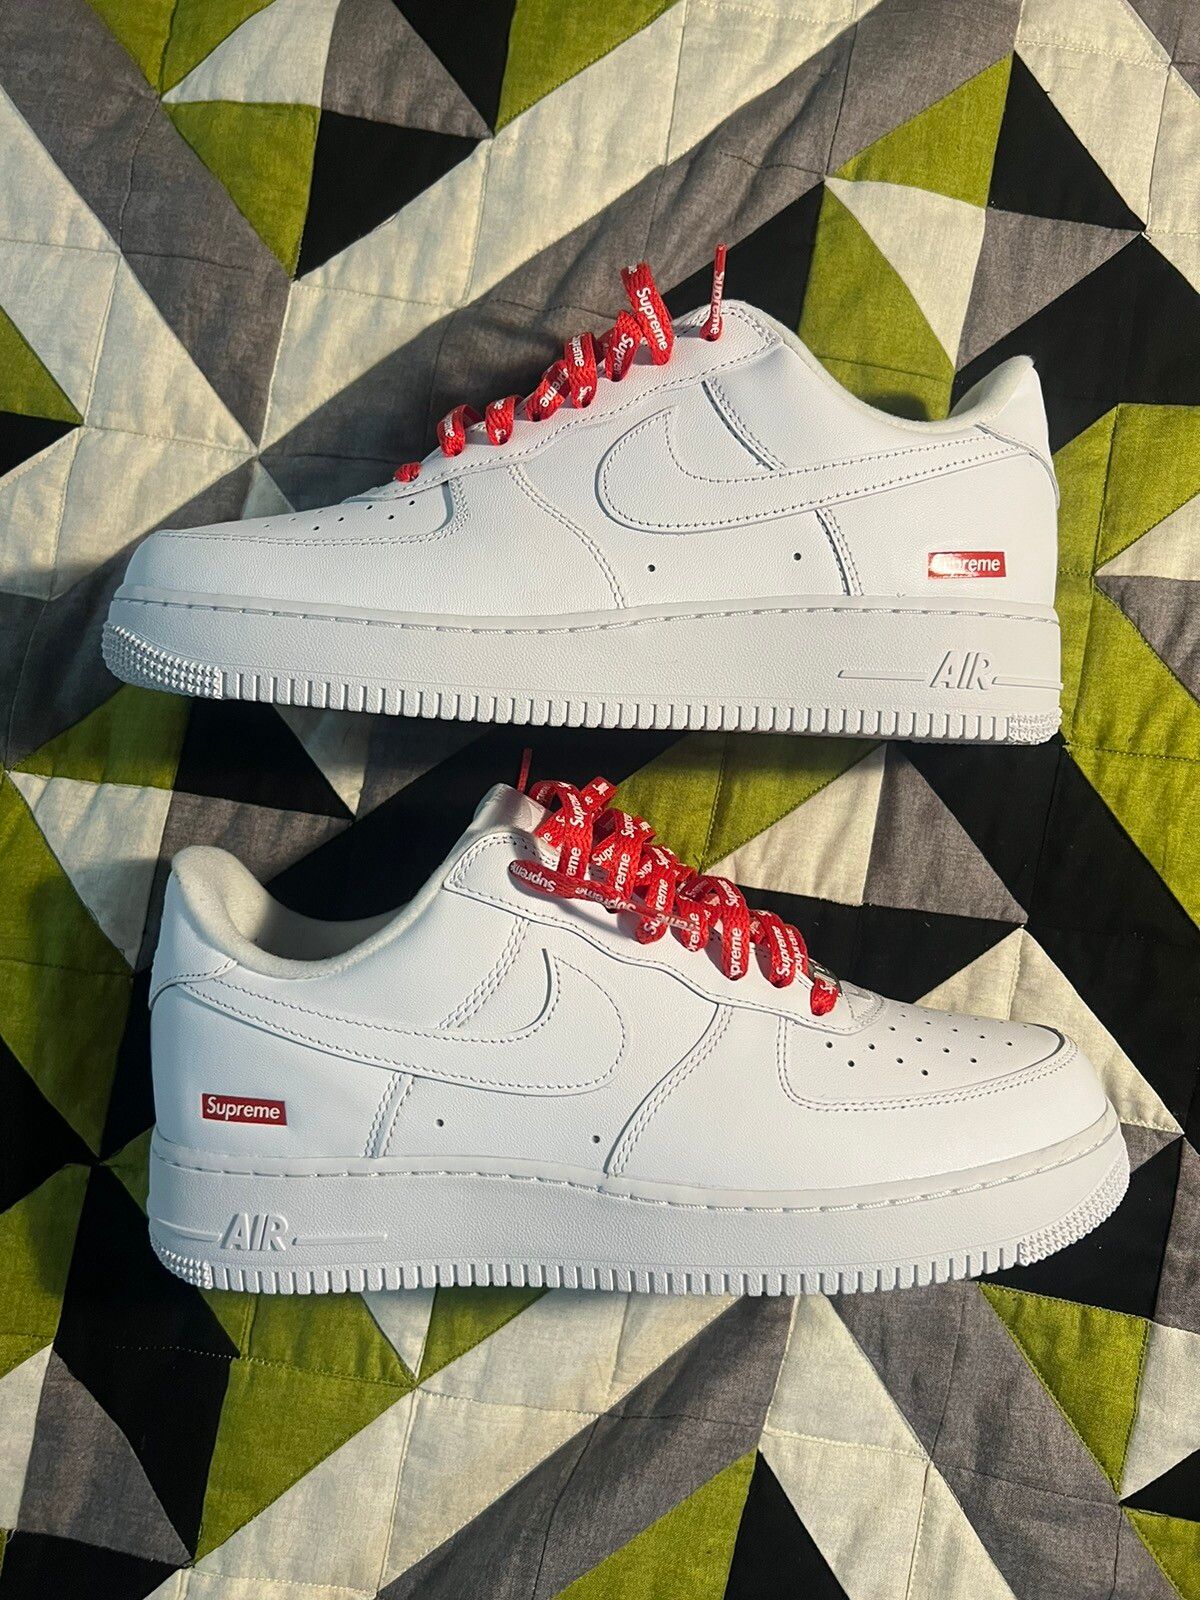 Supreme Supreme Air Force 1 Low SP | Grailed